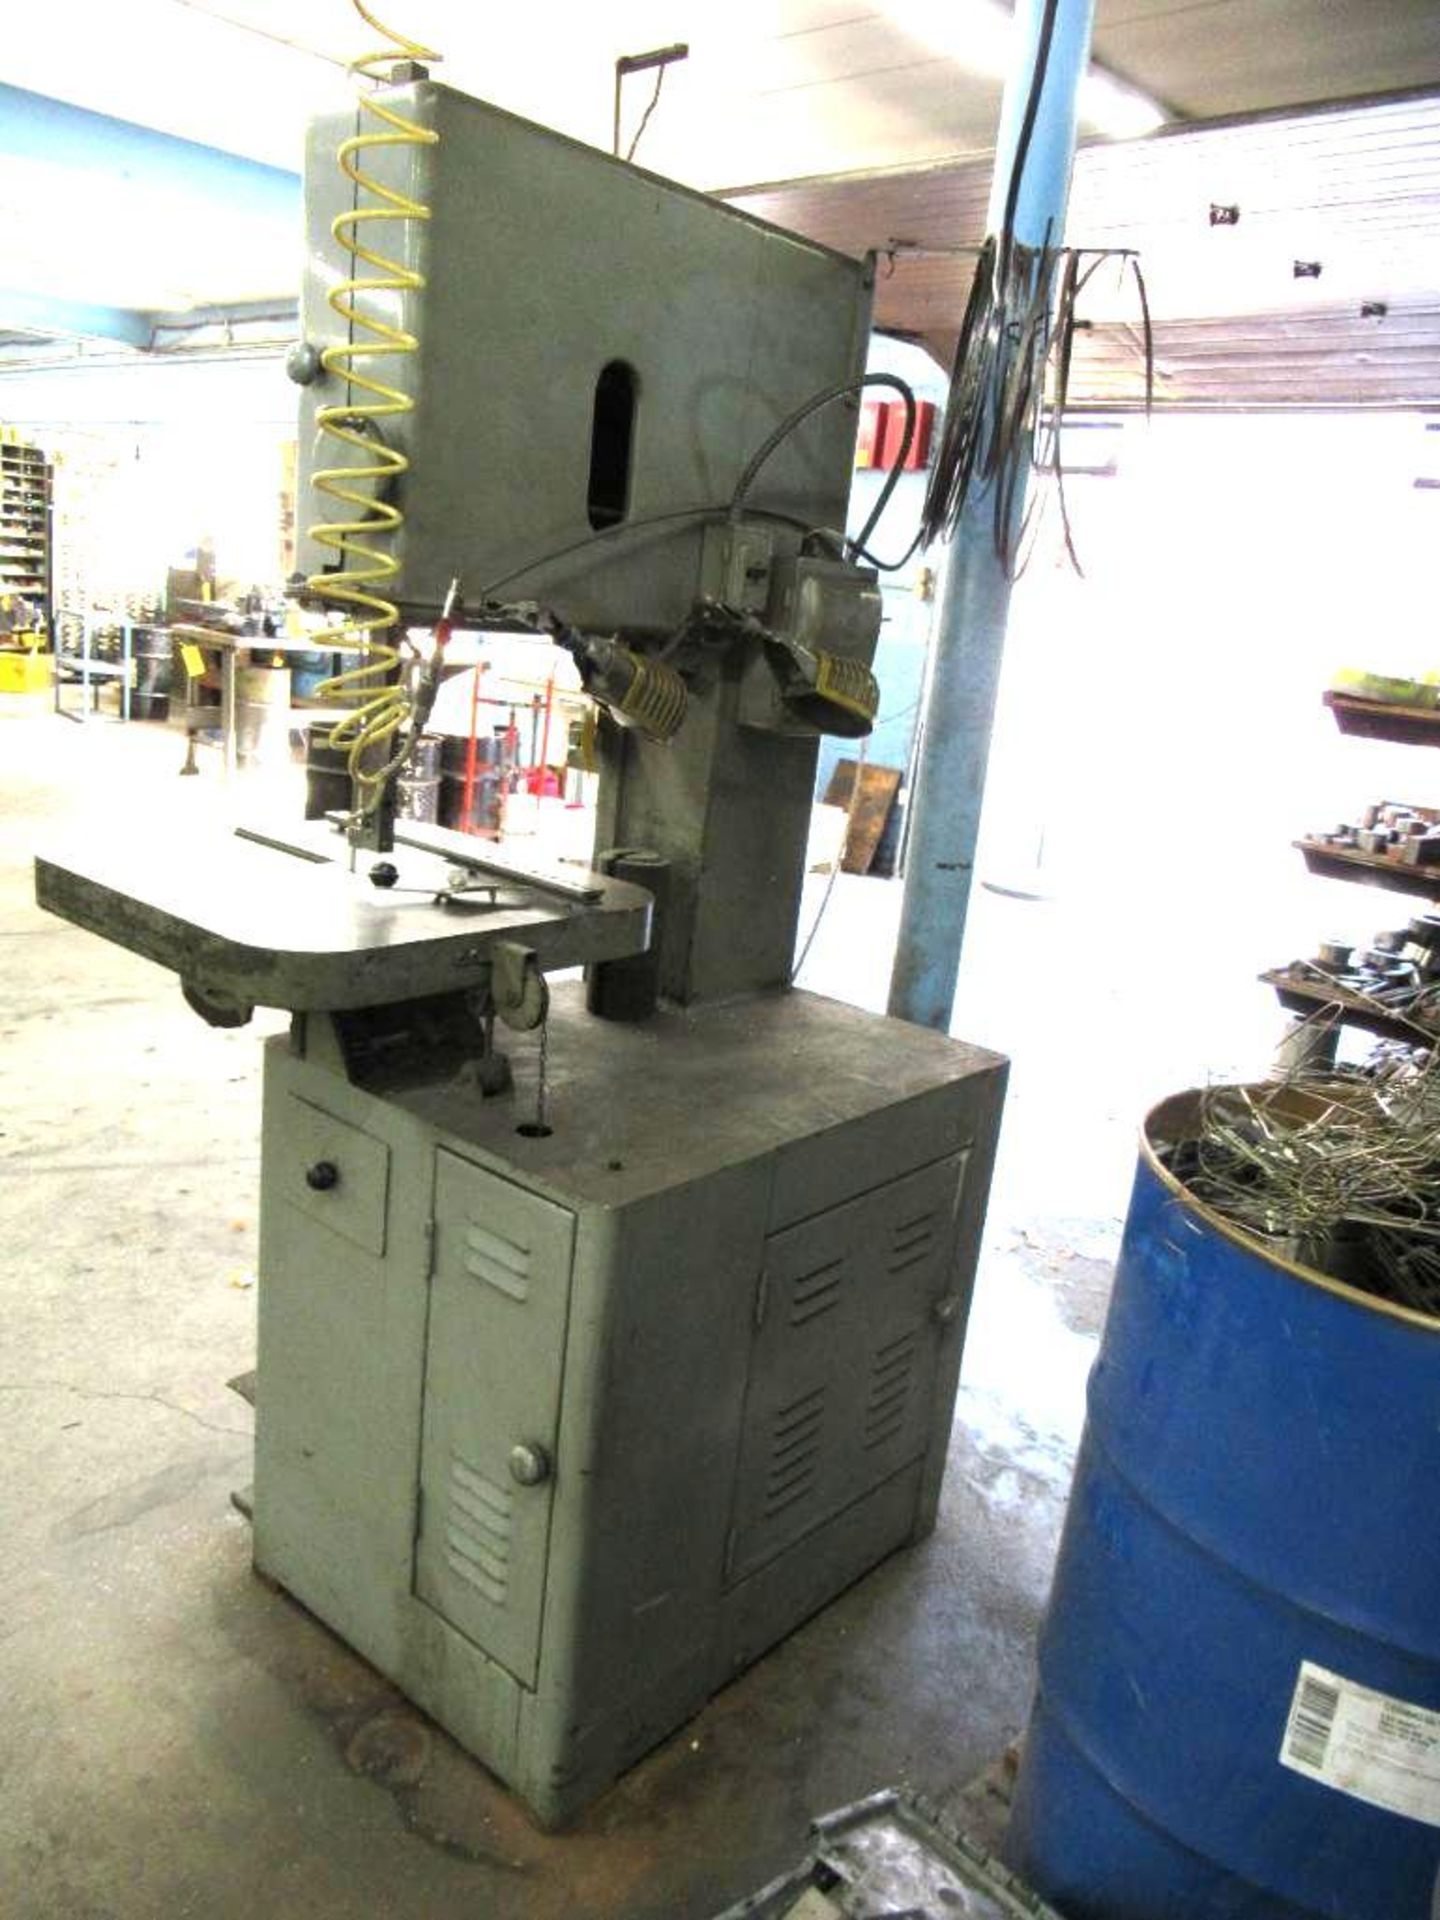 Grob Vertical Band Saw w/18" Throat, 24" x 24" Tilting Table & Blade Welder - Image 2 of 3